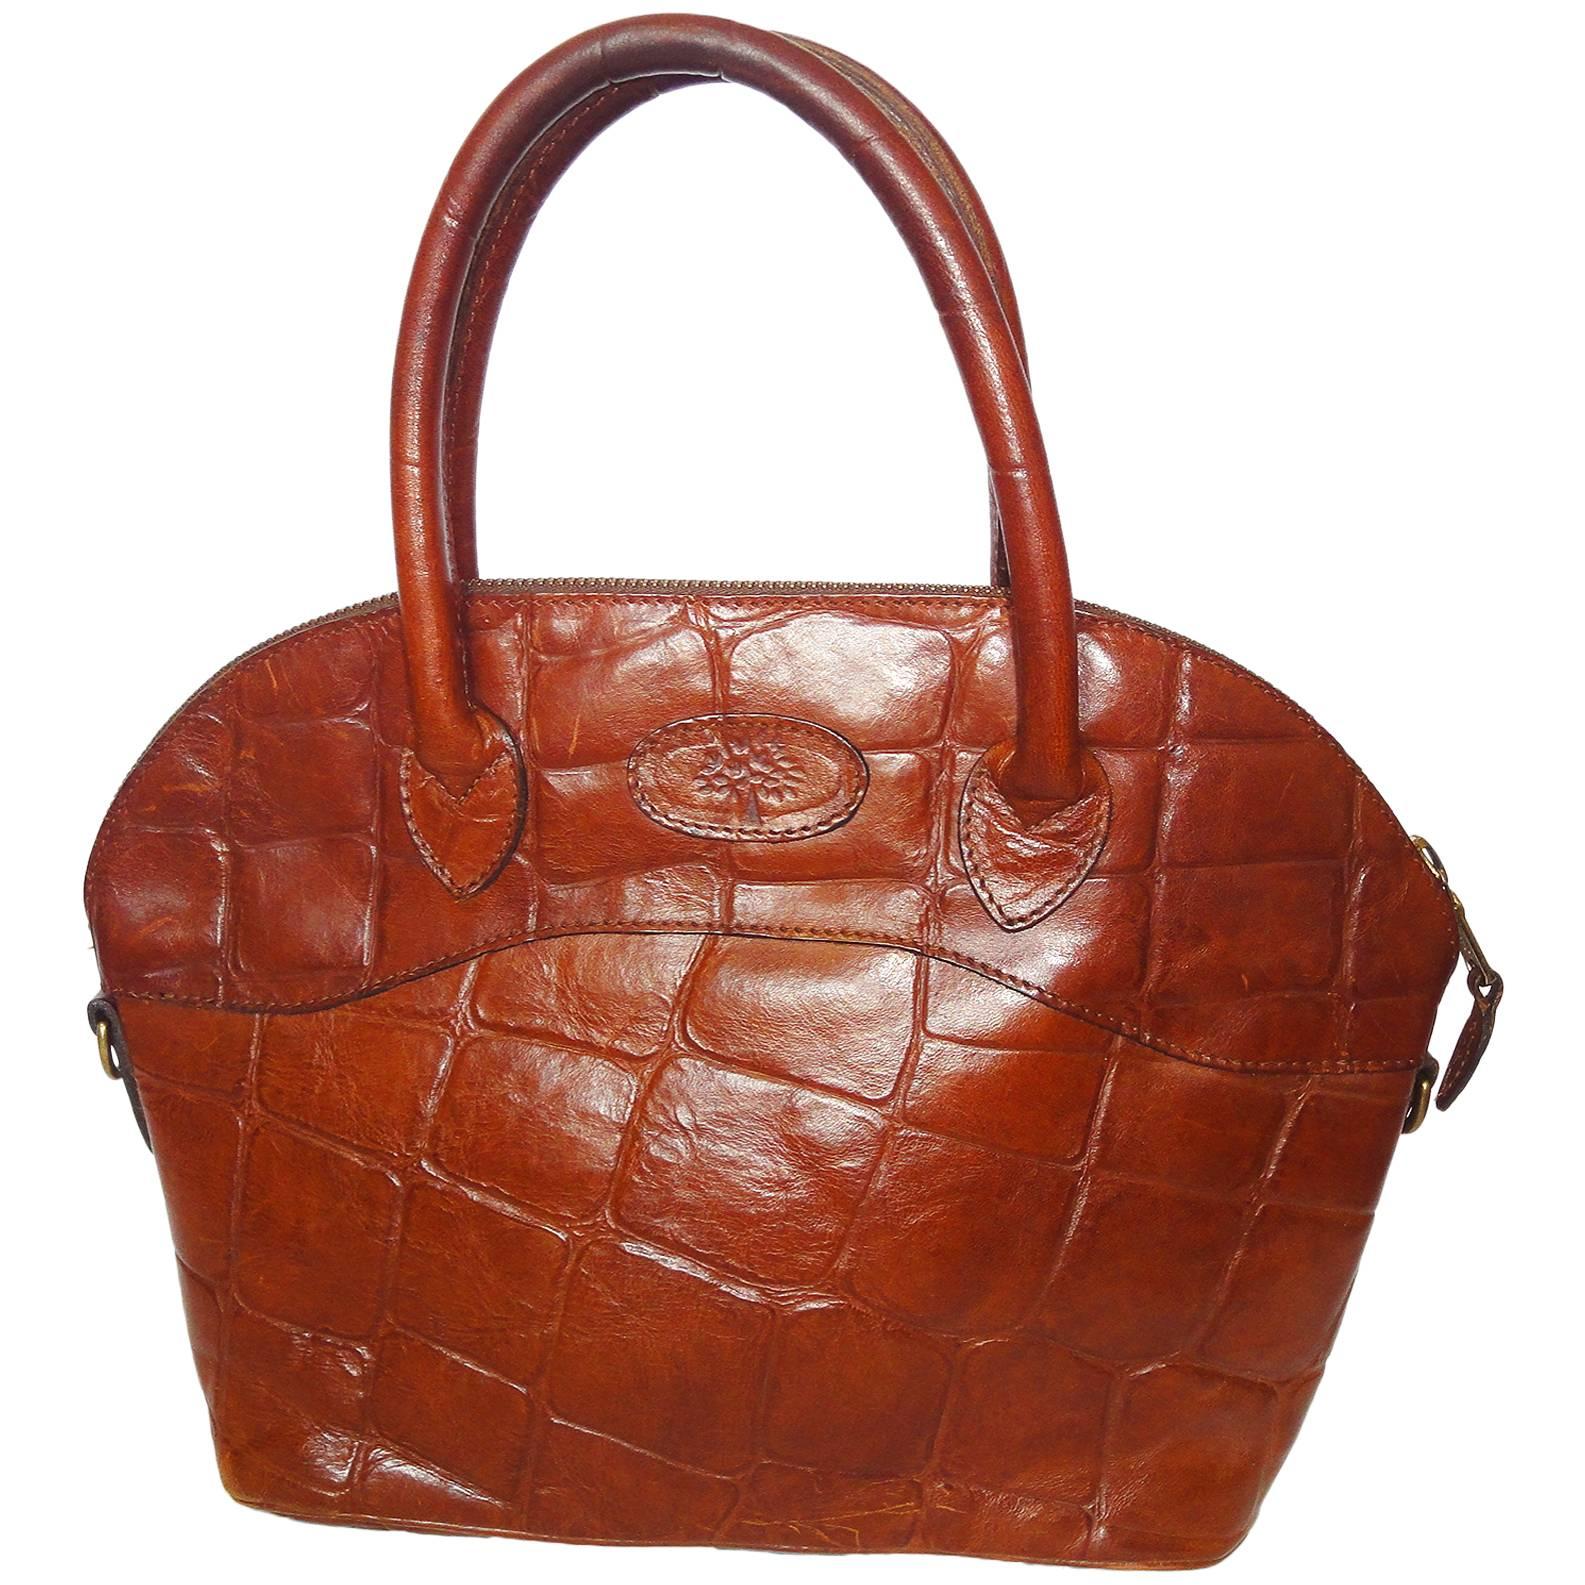 Vintage Mulberry croc embossed brown leather tote bag in bolide bag style.